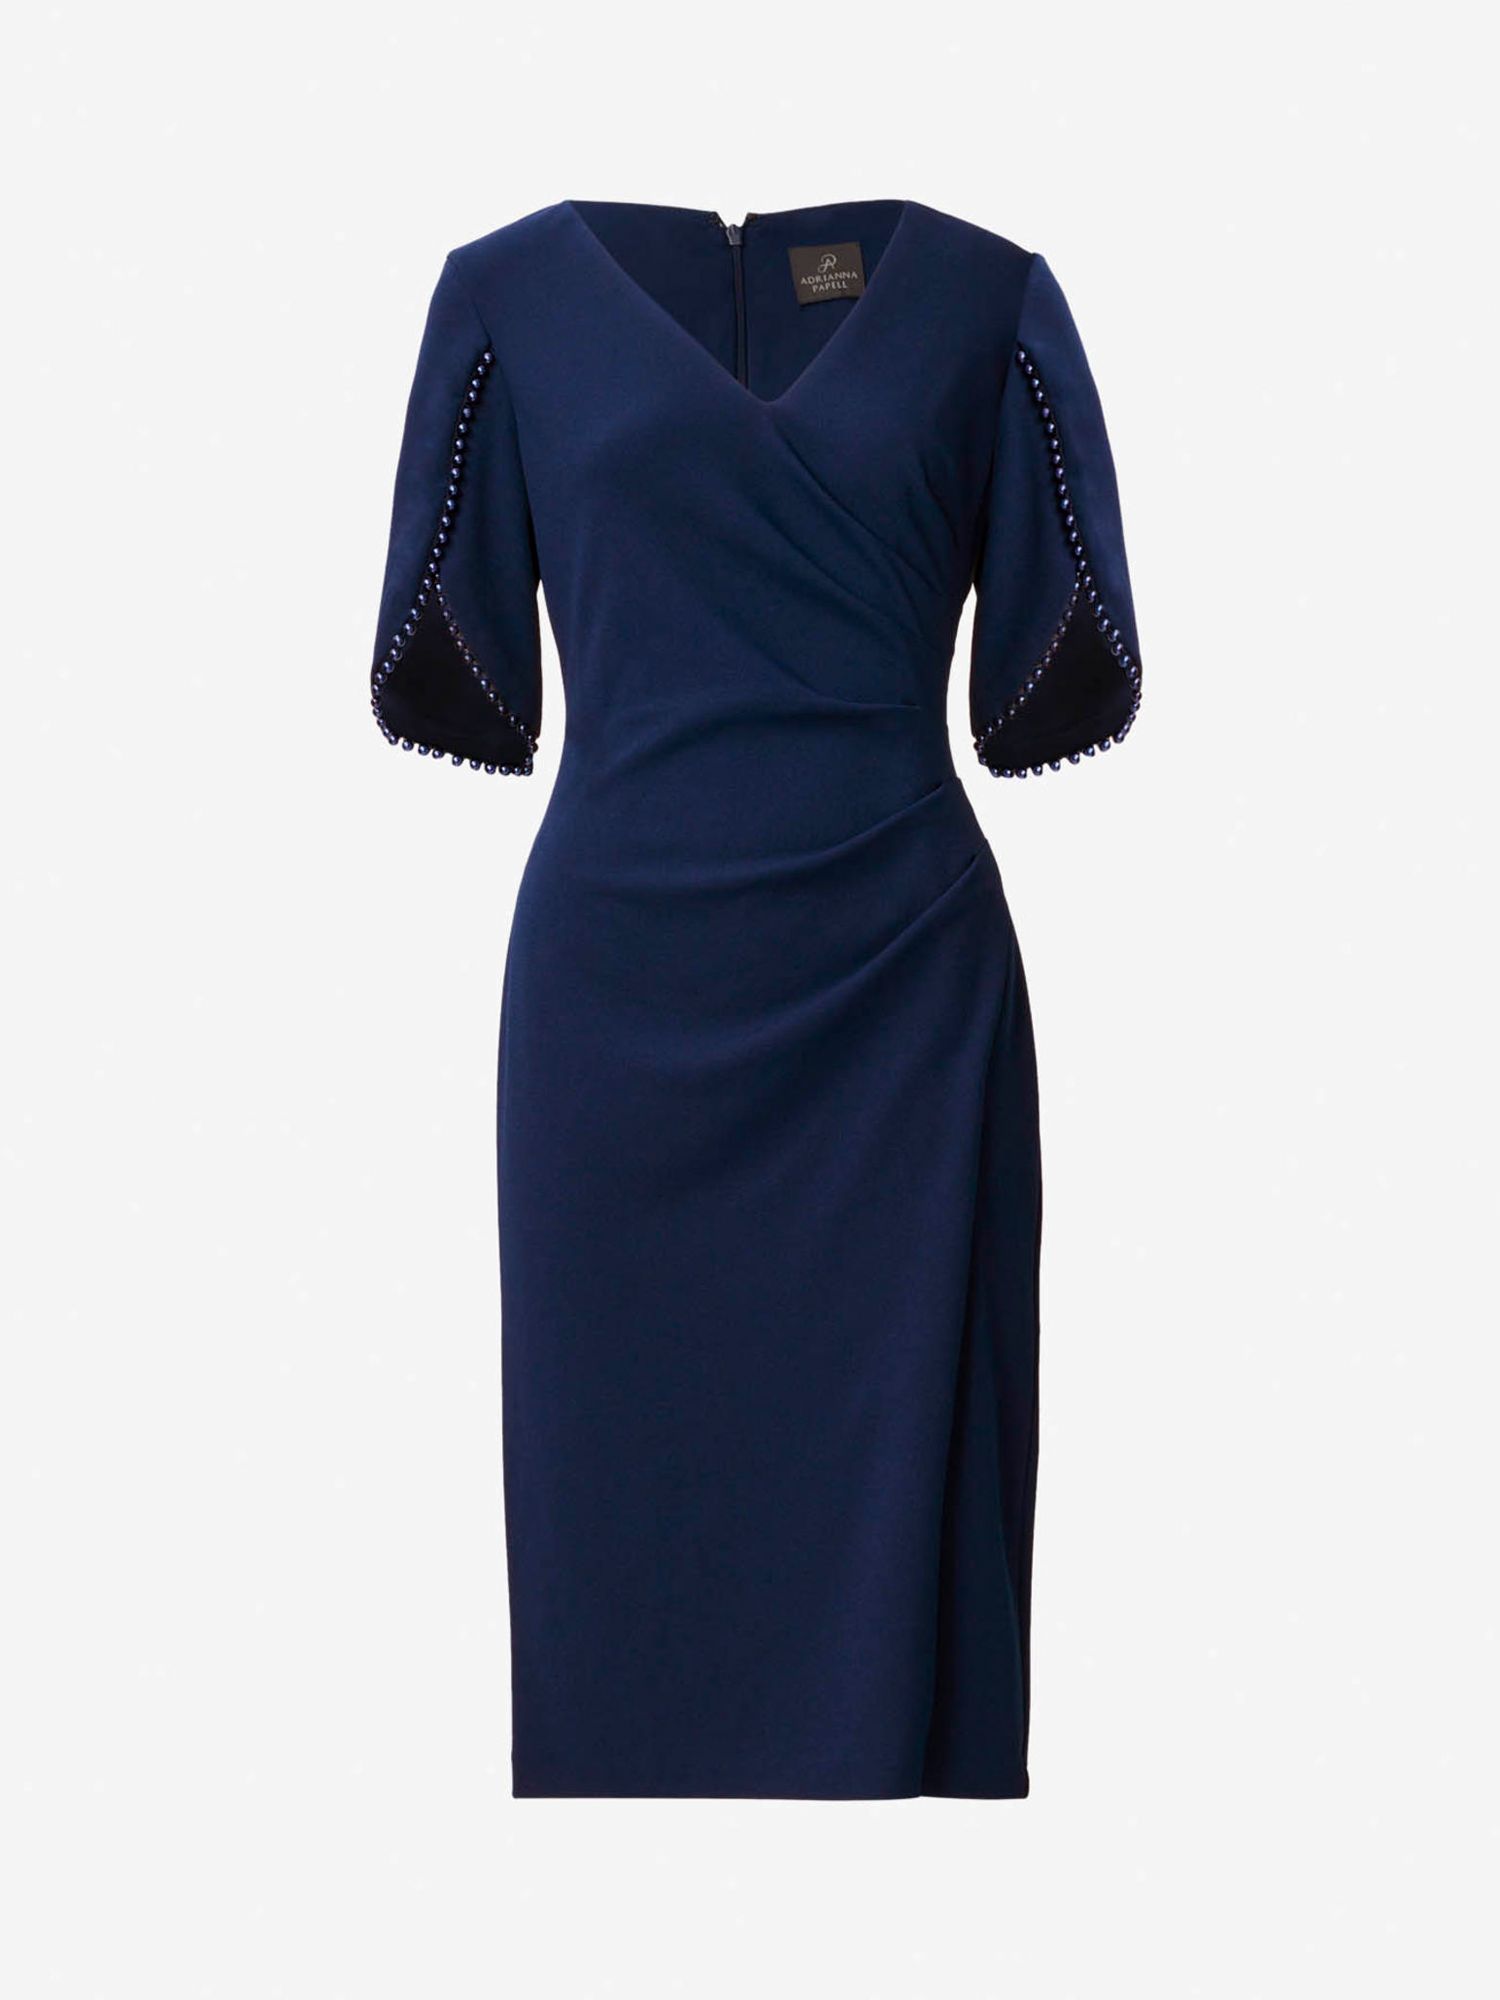 Adrianna Papell Knit Crepe Pearl Trim Knee Length Dress, Navy Sateen at ...